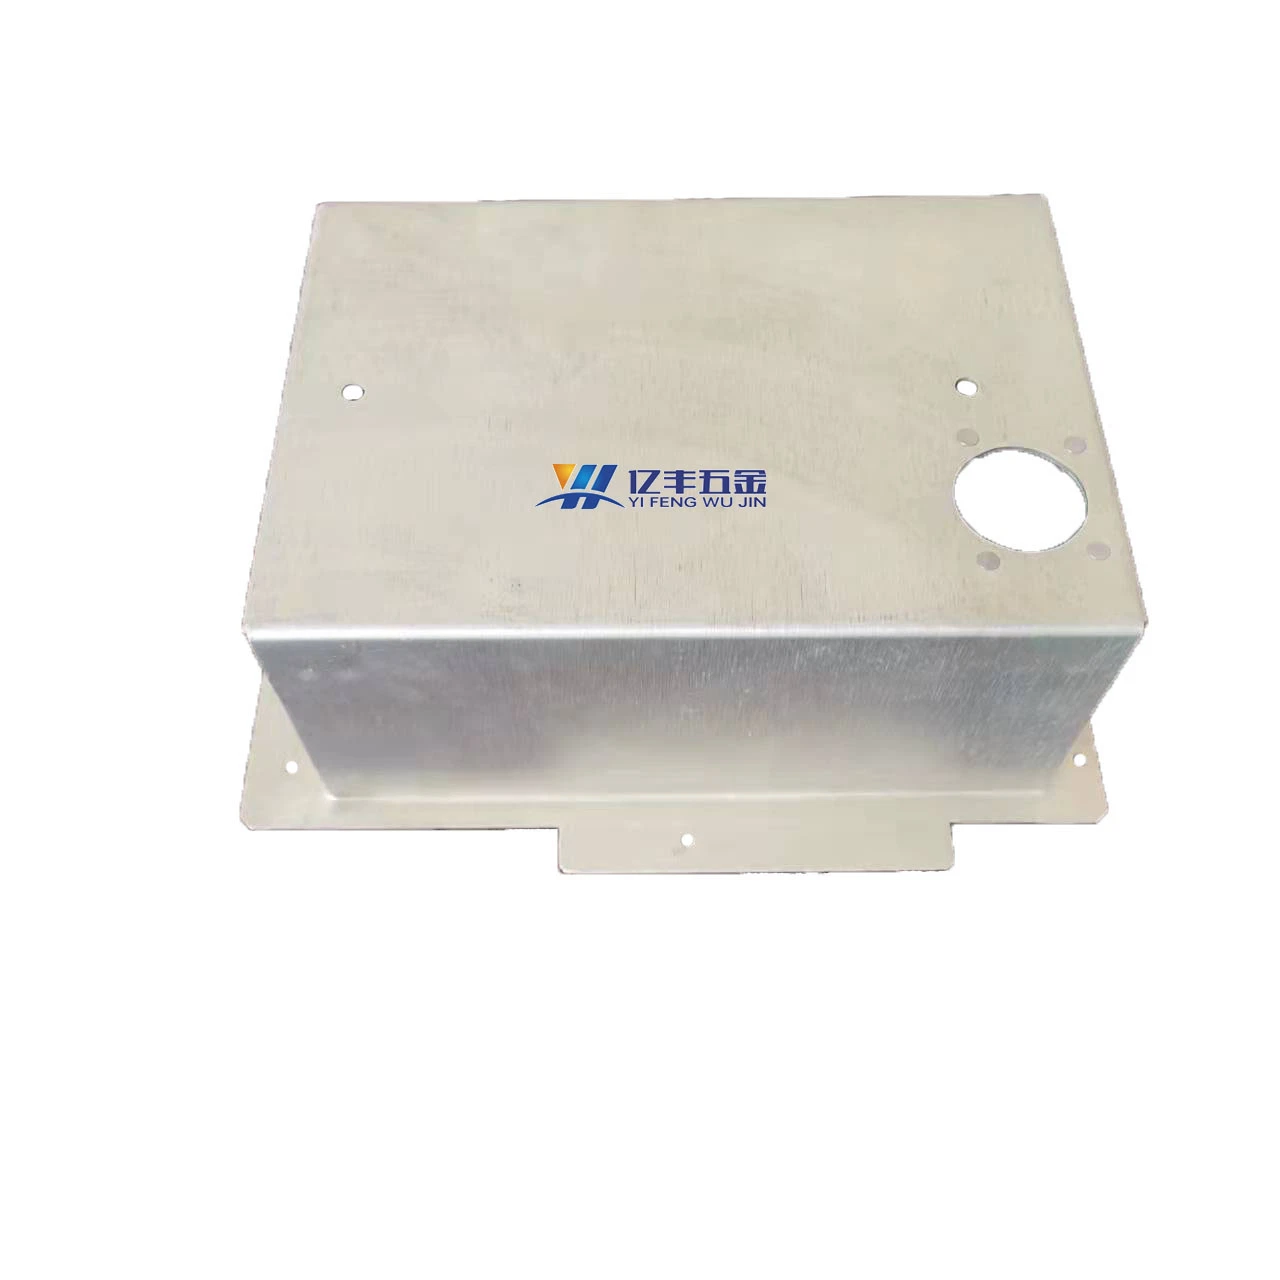 OEM Customized Stamping Sheet Metal Parts for The Chassis of Communication Devices